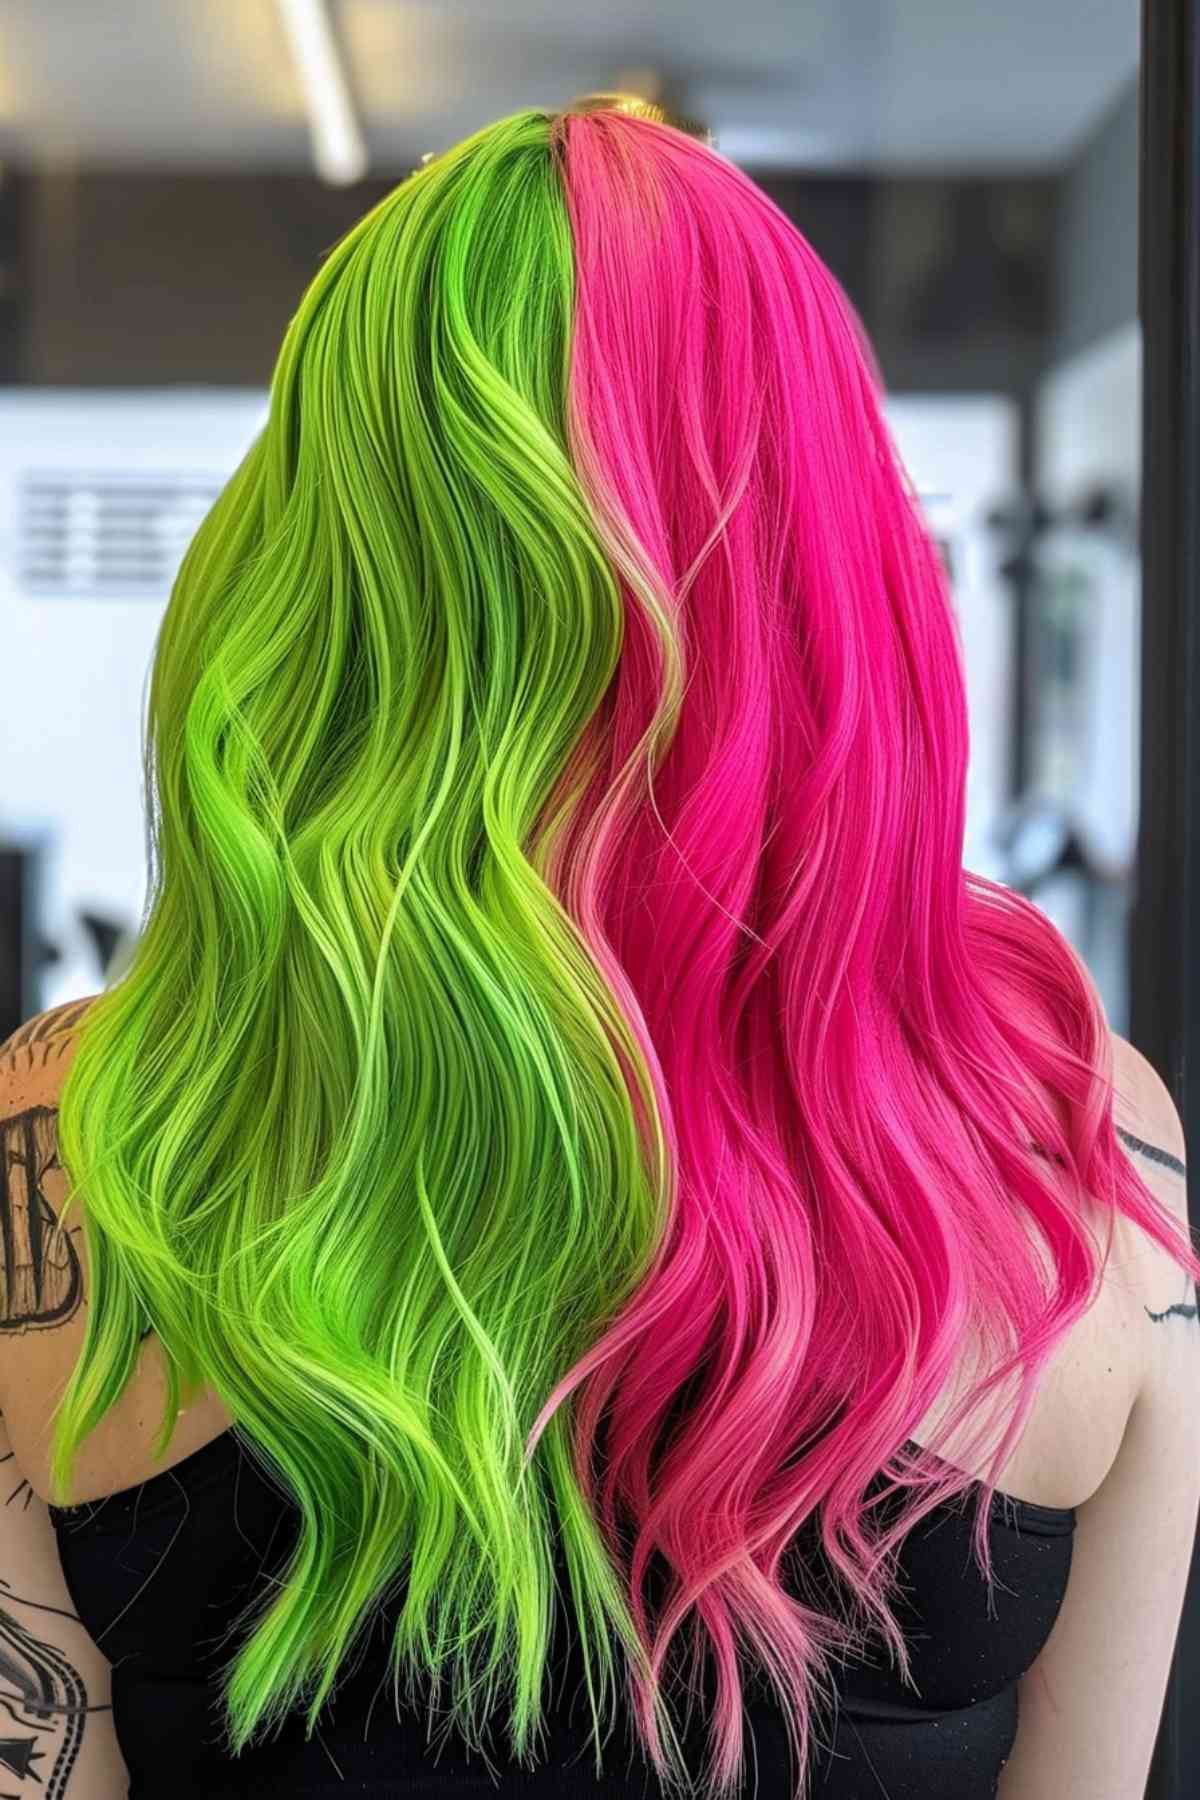 Split-dyed hair in bright green and pink, straight, mid-back length, showcasing Gemini duality.